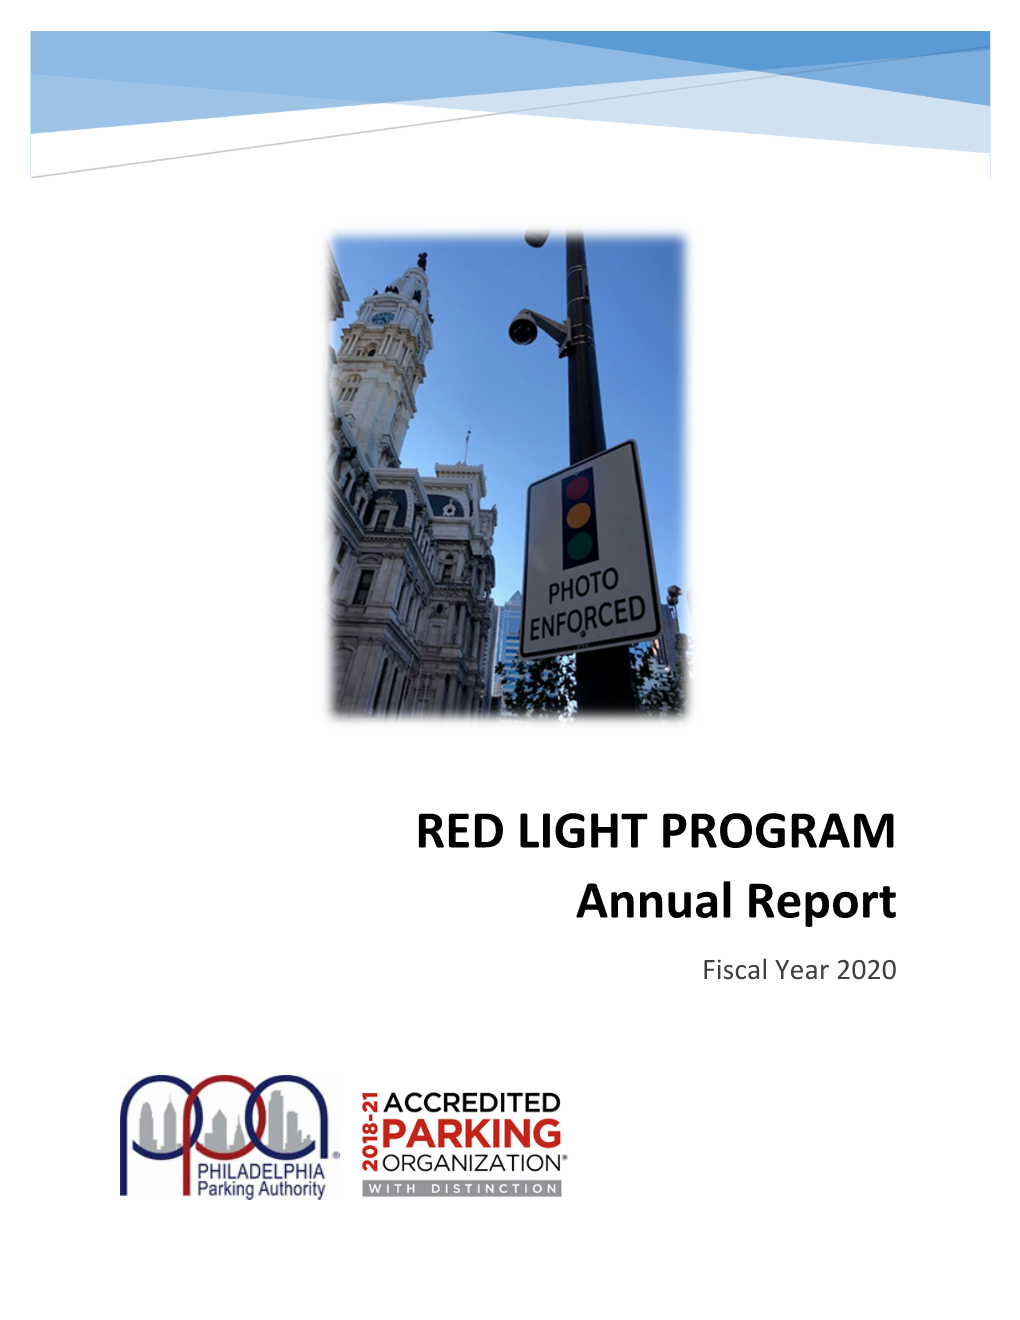 RED LIGHT PROGRAM Annual Report Fiscal Year 2020